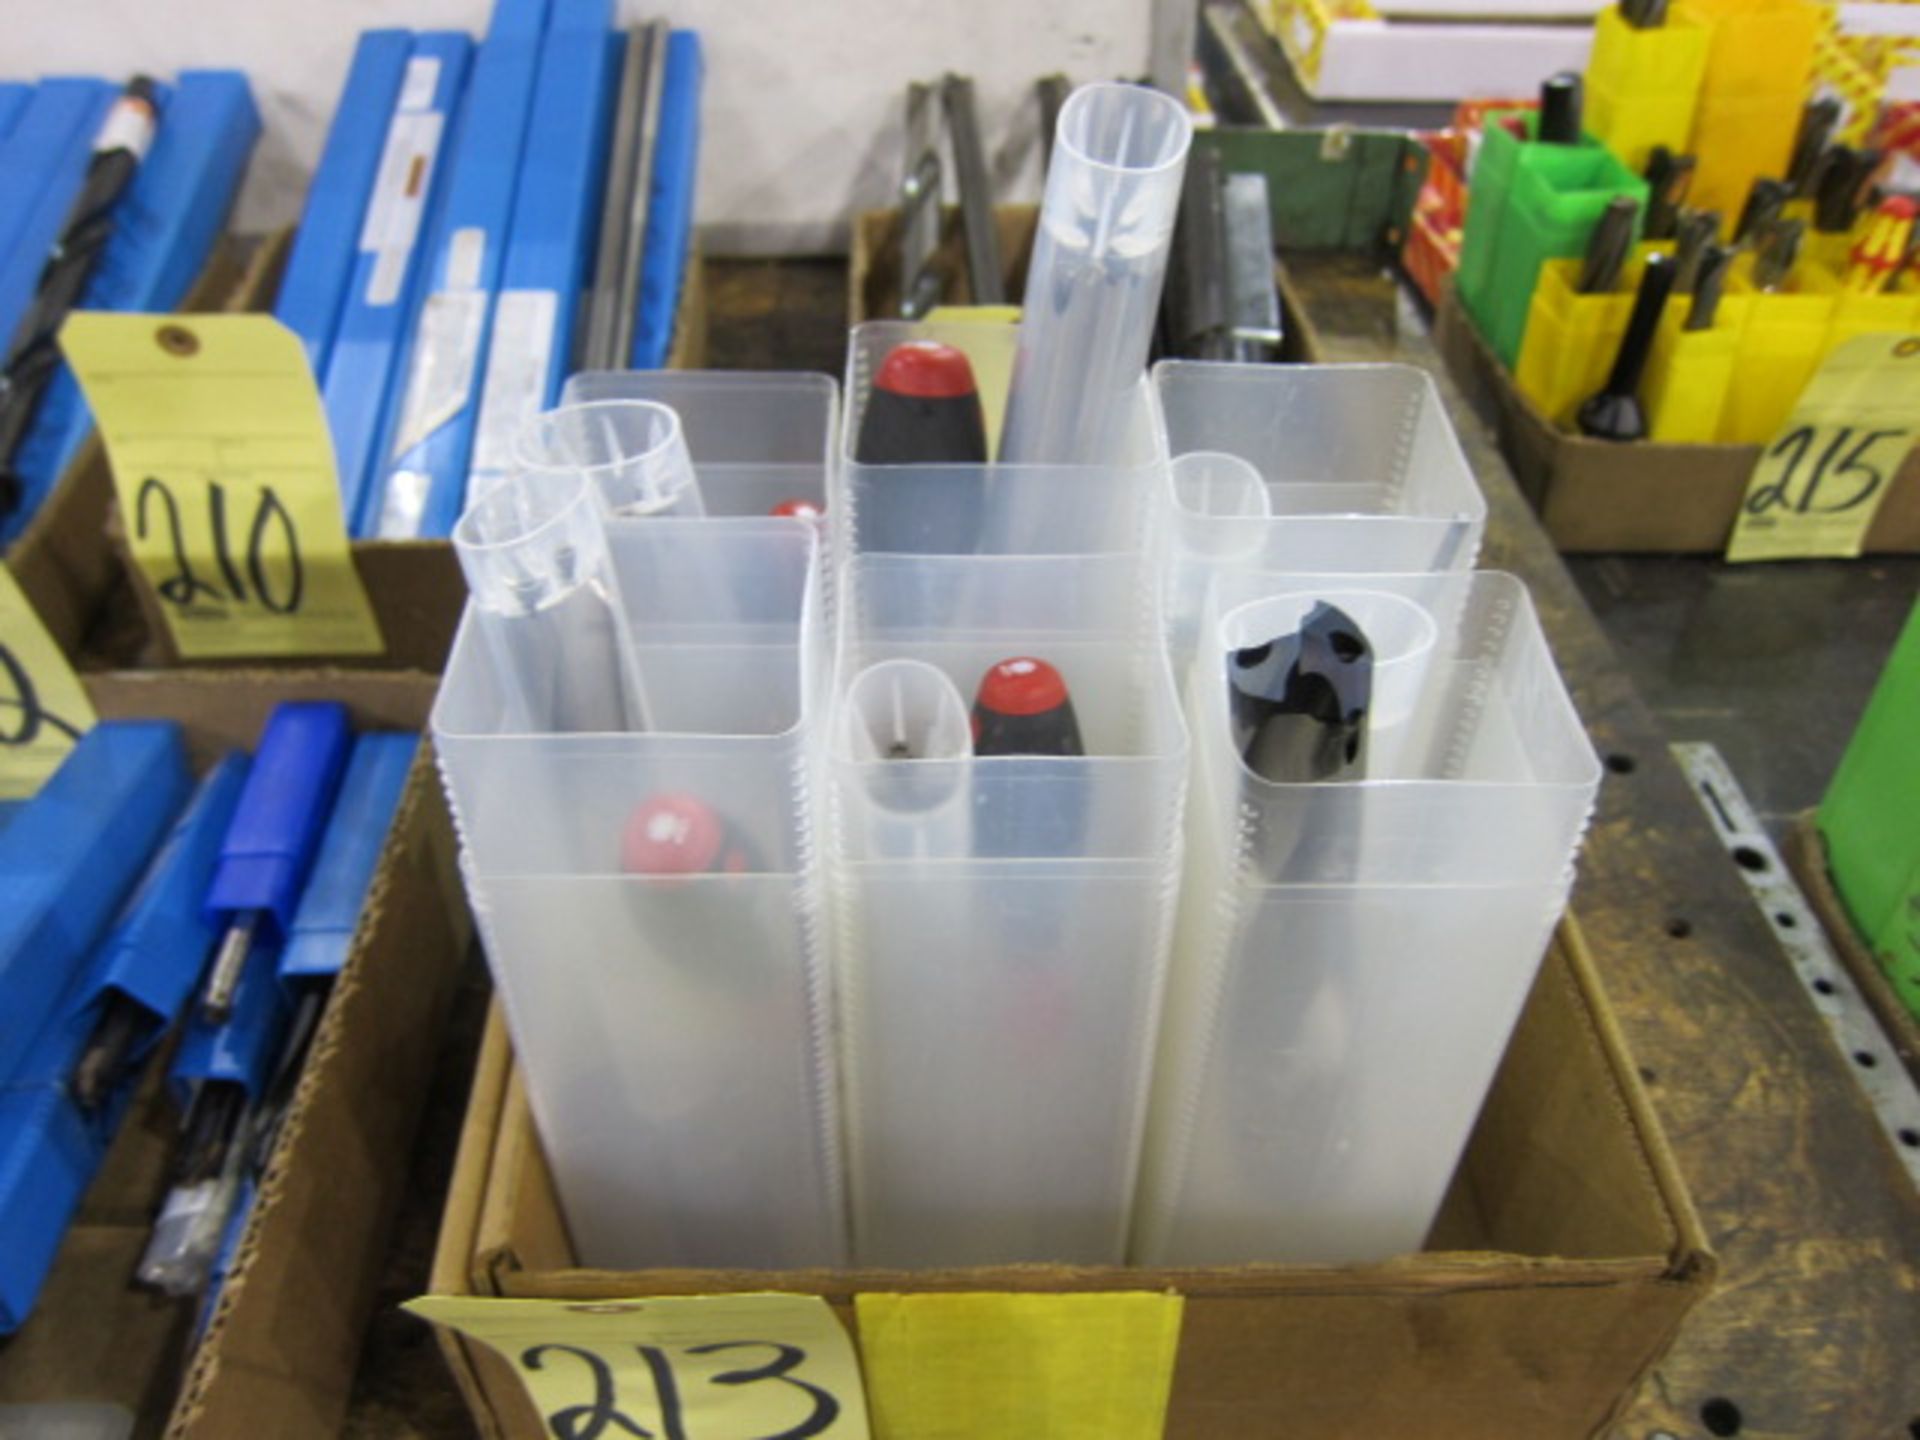 LOT OF INSERT DRILLS (6) (in one box)